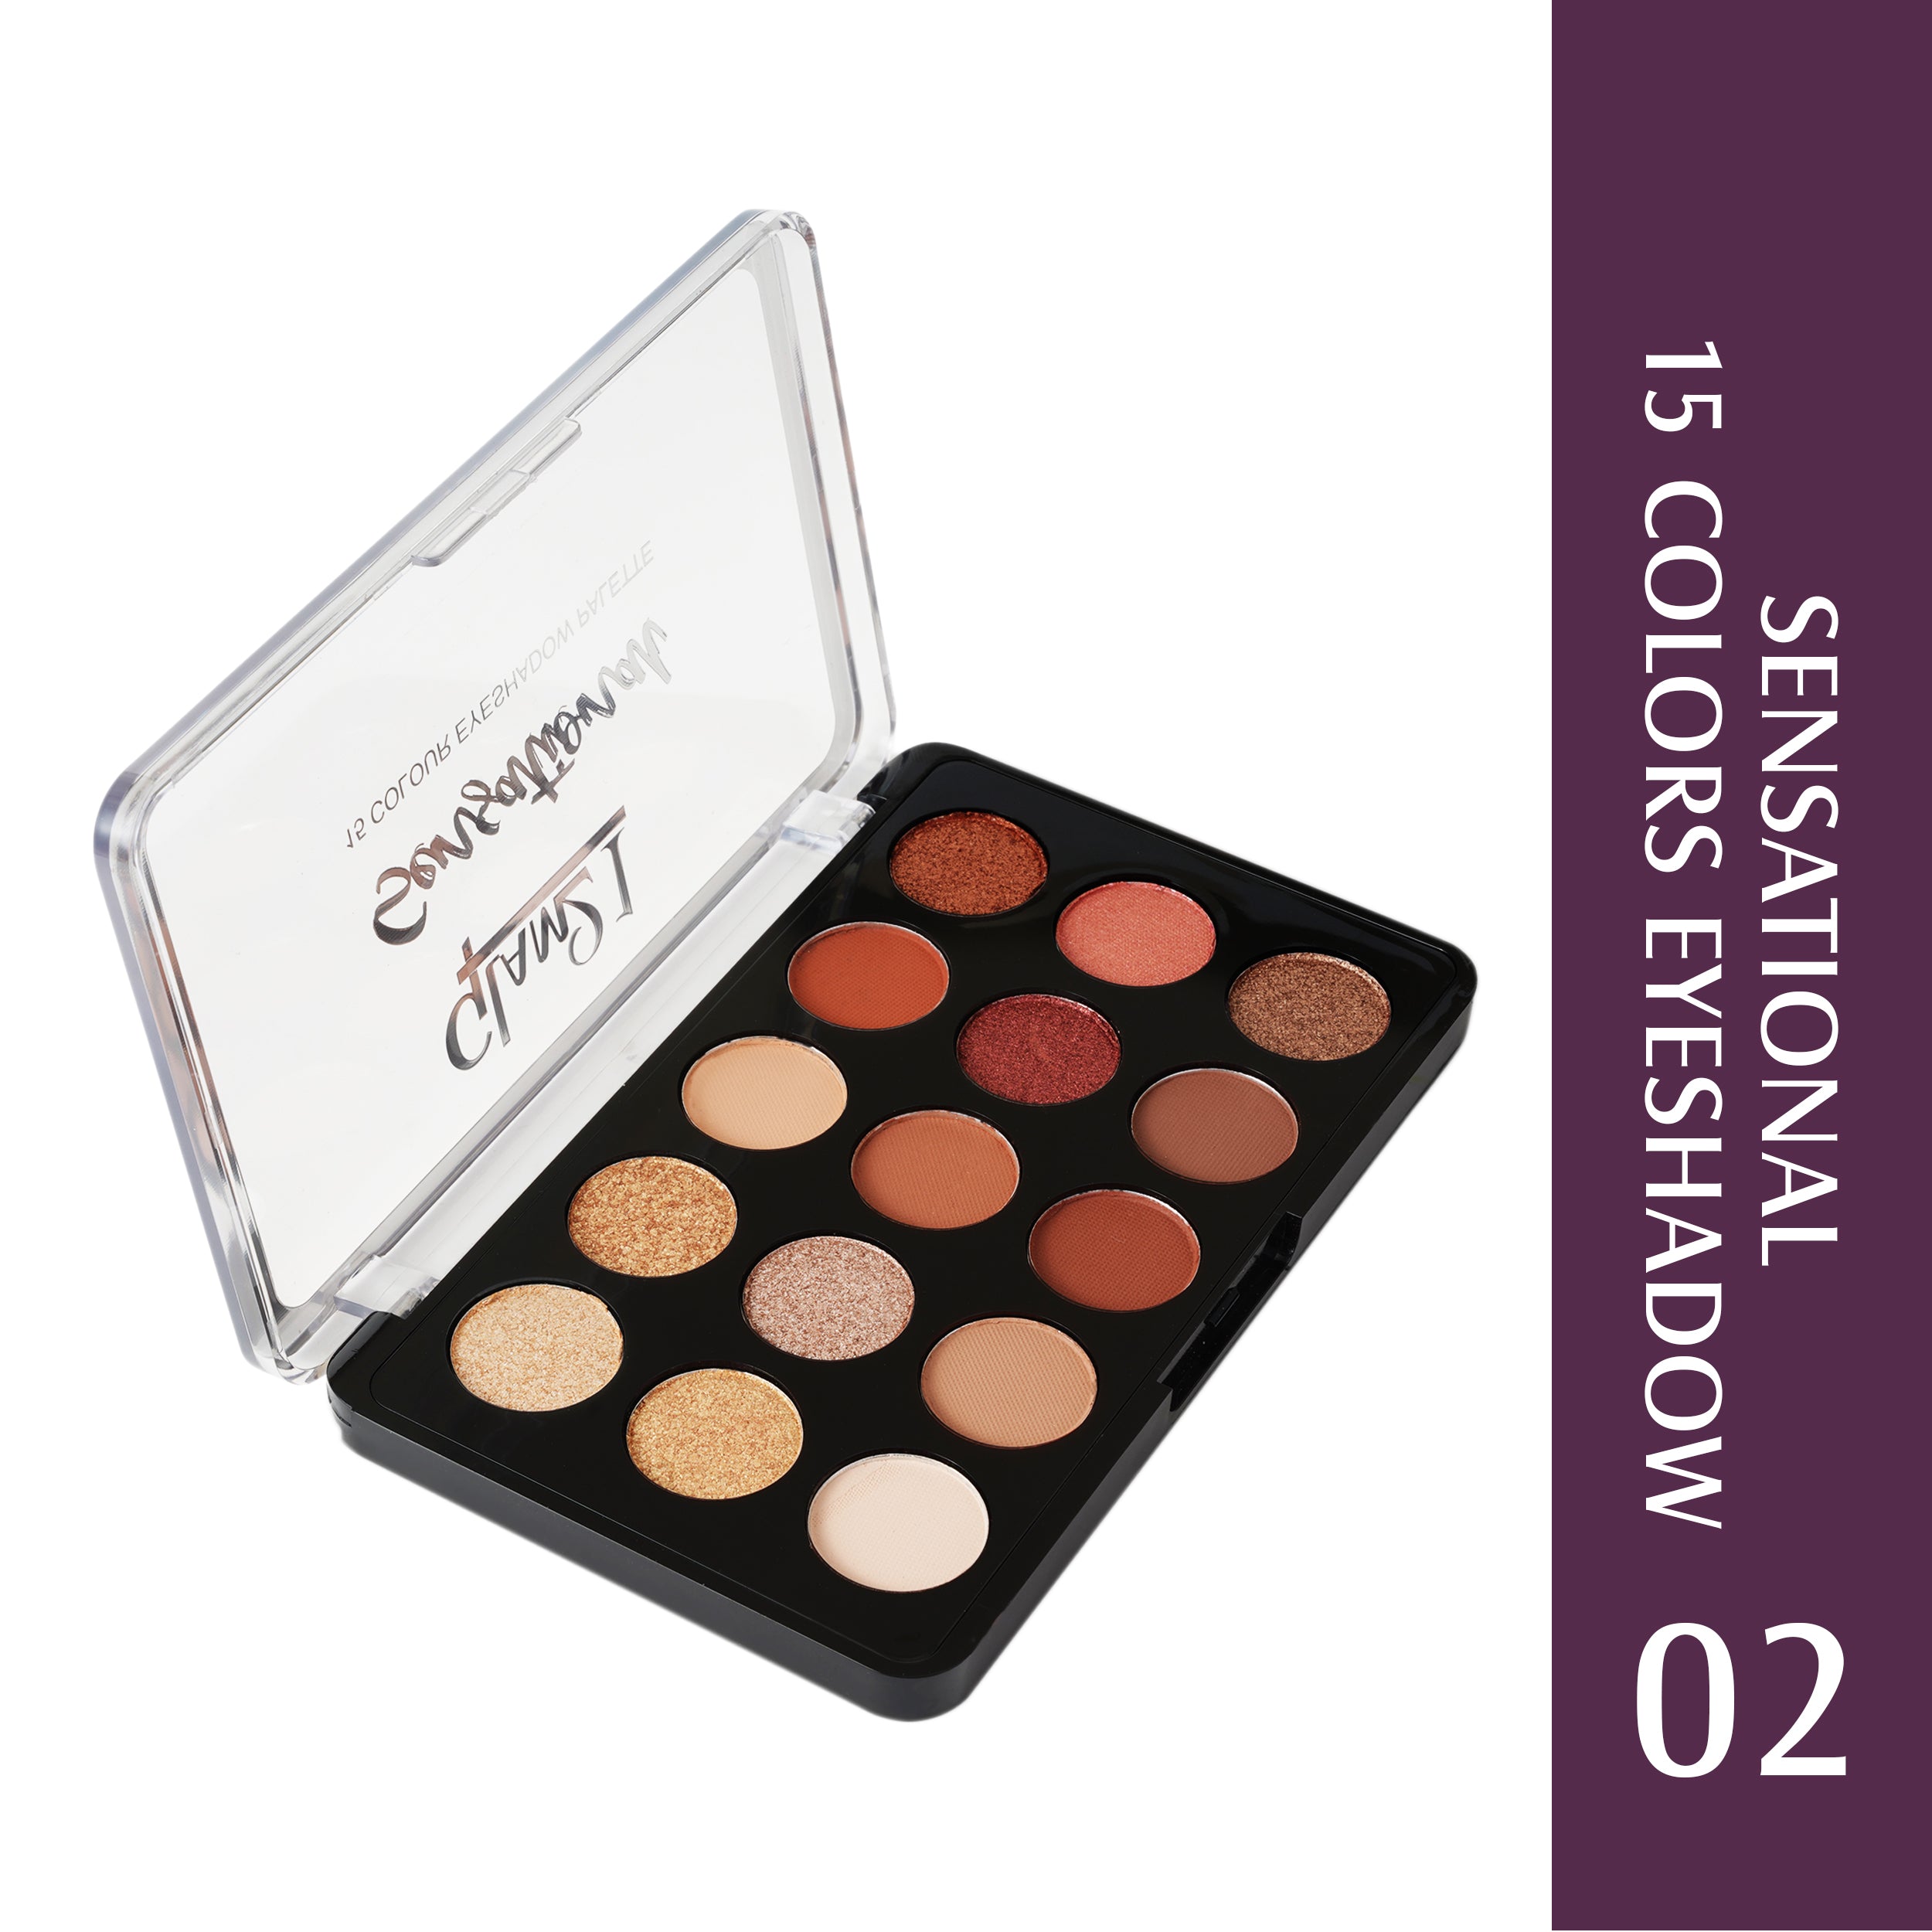 Glam21 Sensational 15 Colour Eyeshadow Palette-Unique Combination of Mattes & Shimmers 14 g (Shade-02)